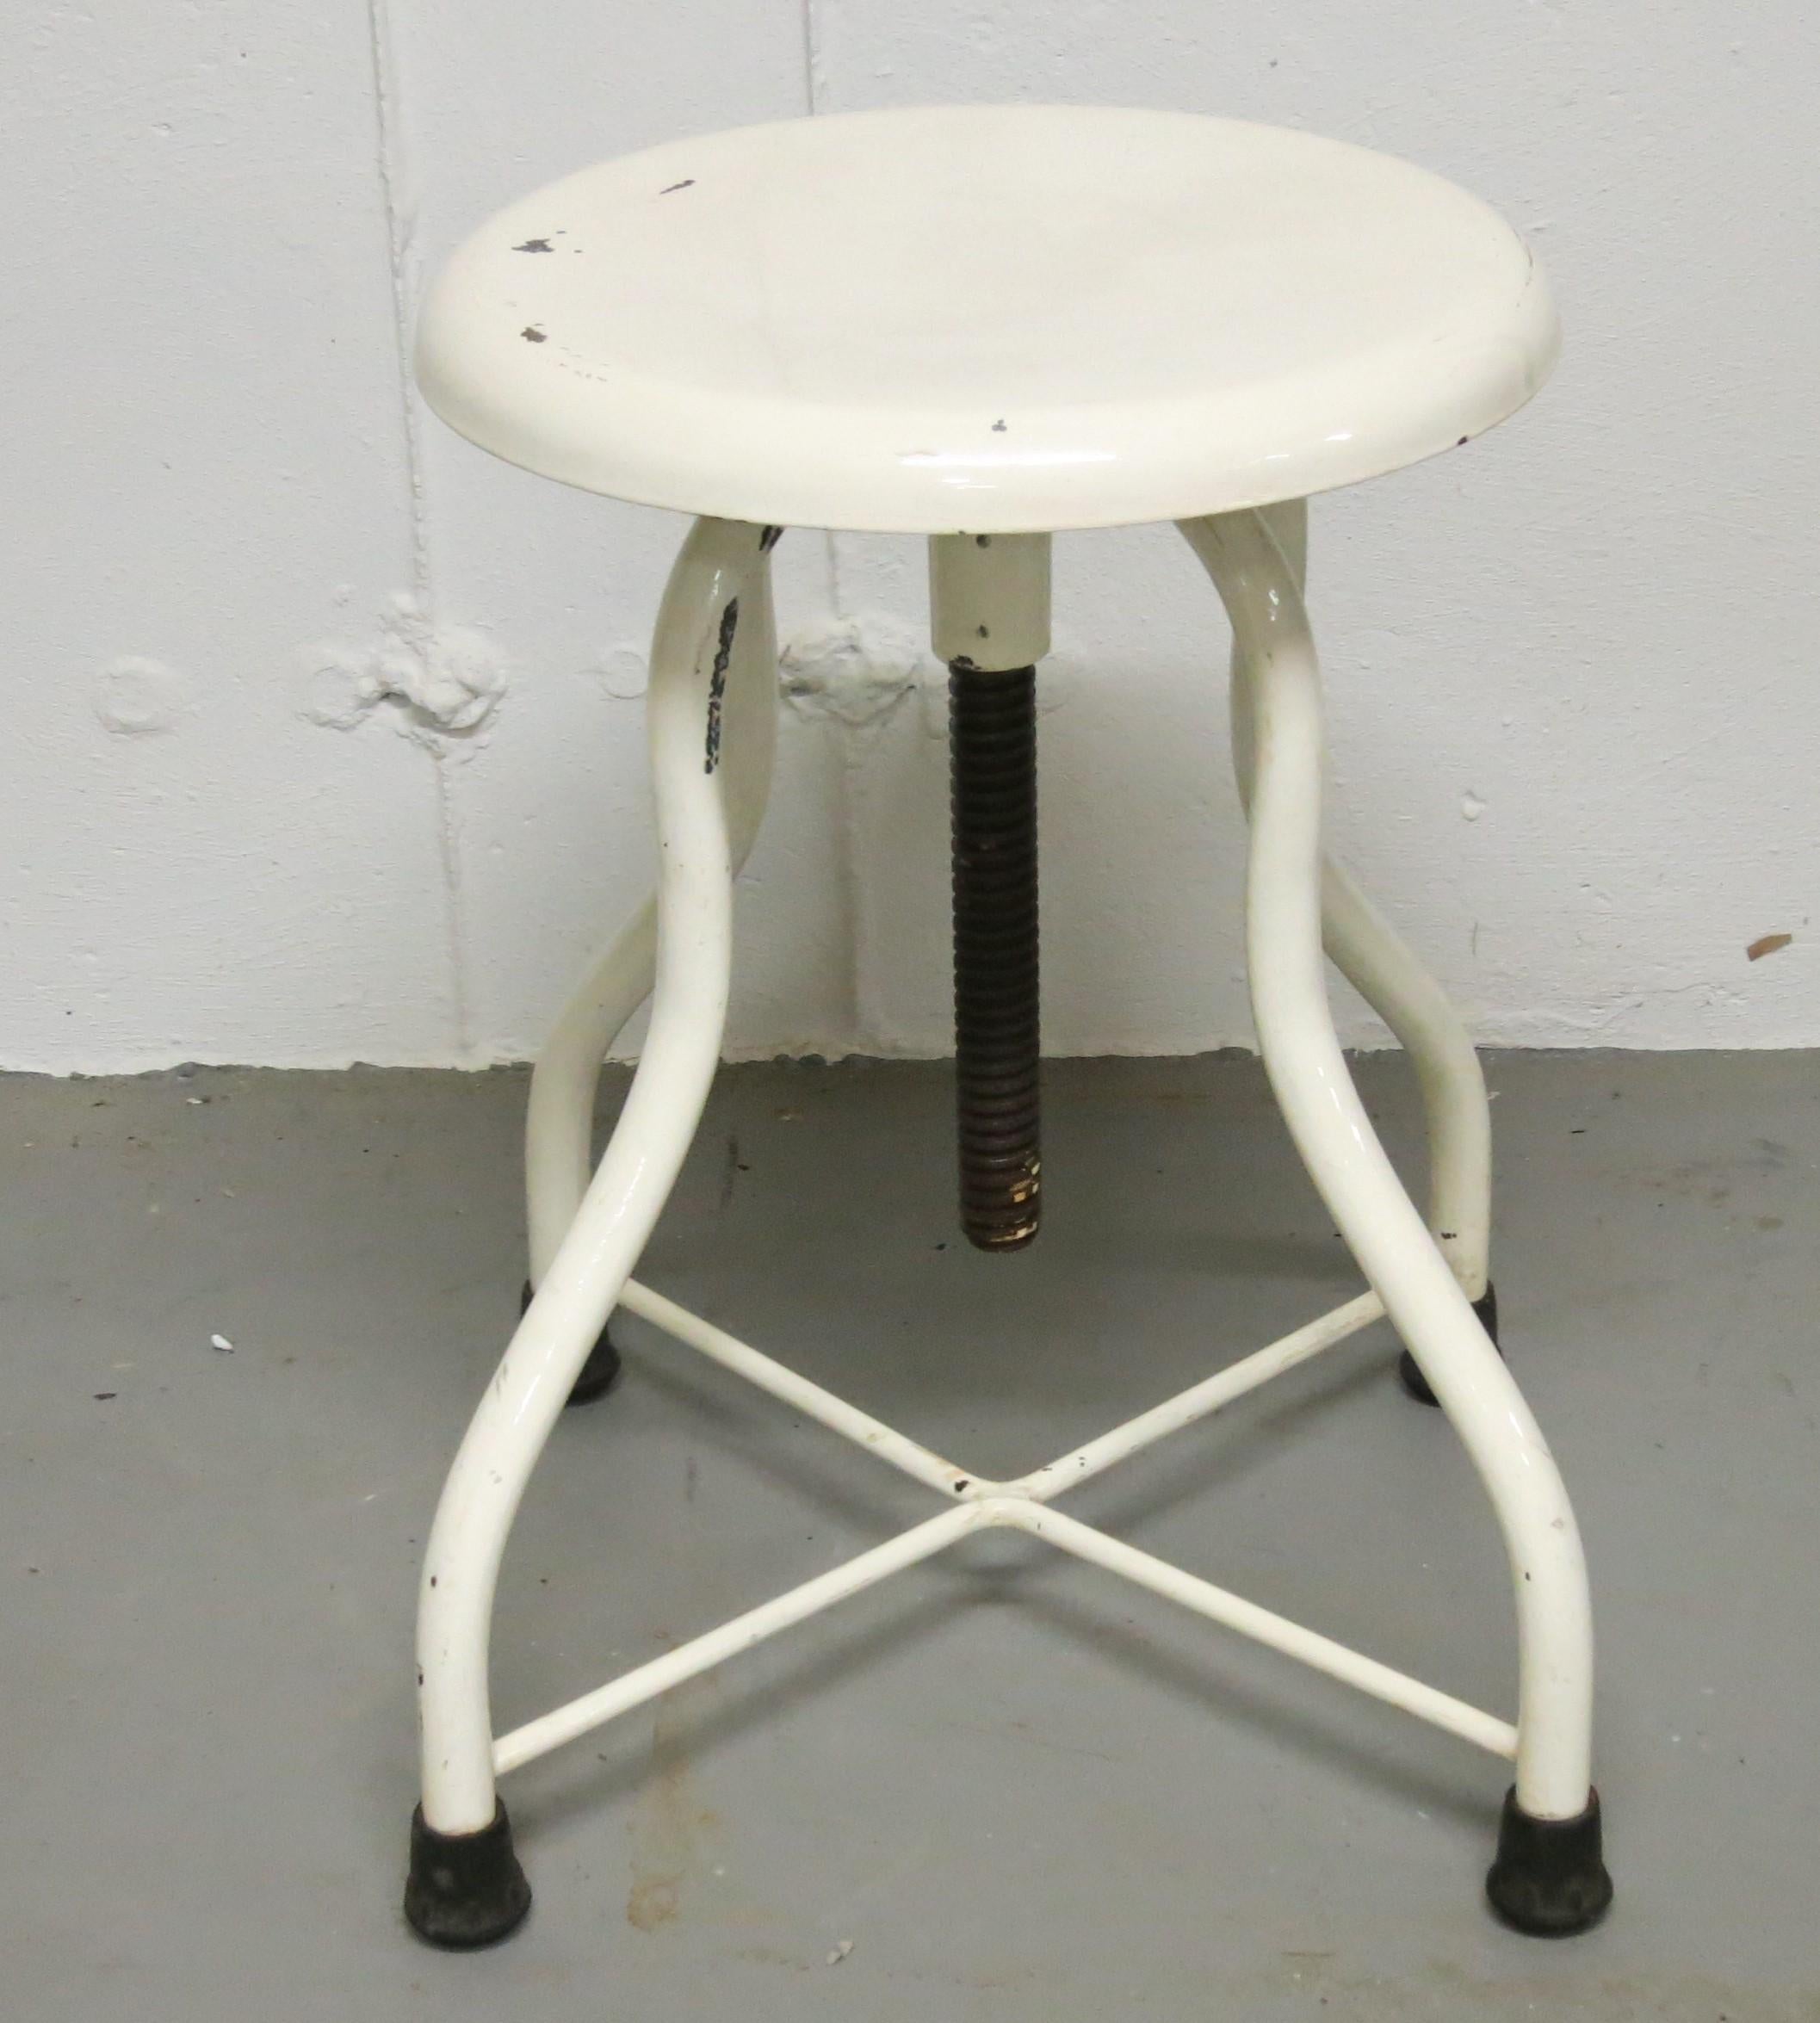 Vintage medical stool painted white with paint loss and scratches. It is 14